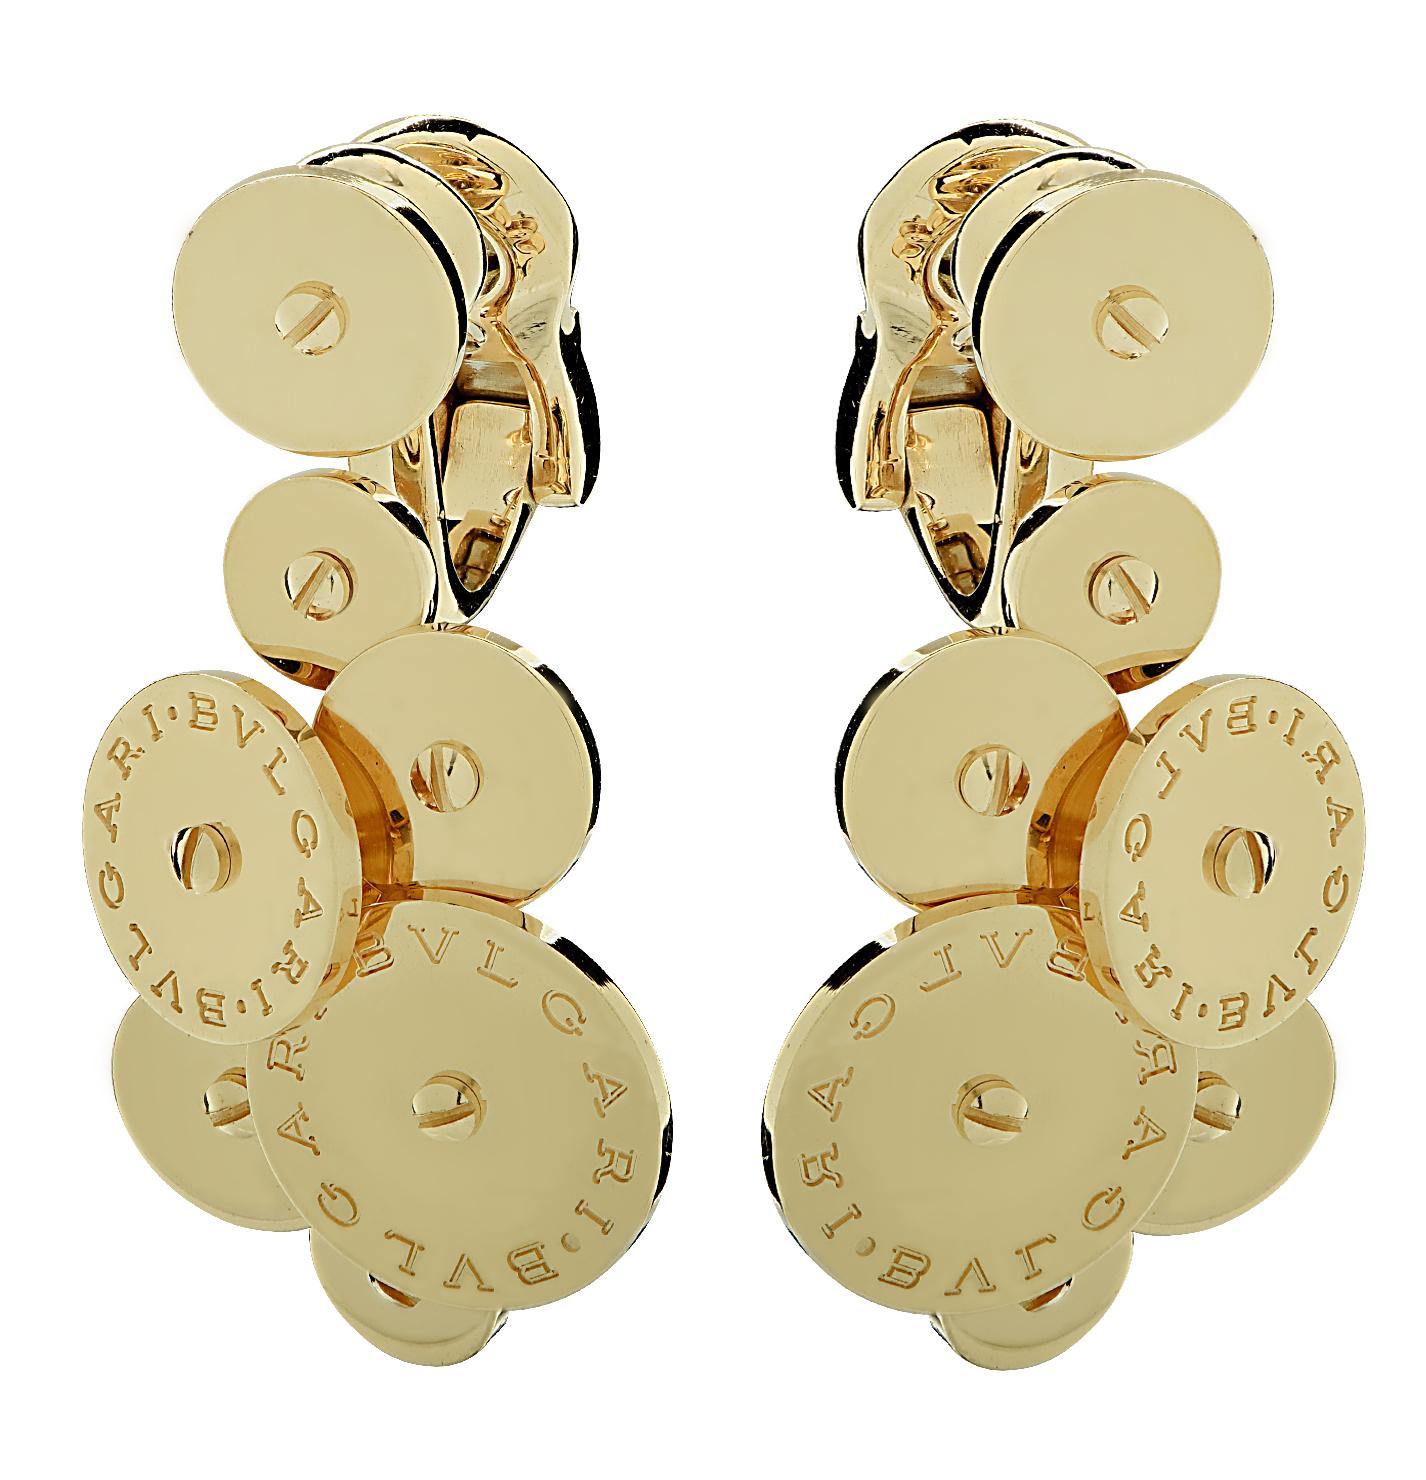 Stunning Bvlgari Cicladi earrings fuse elegance with modern design. Crafted in 18 karat yellow gold , showcasing gold discs fashioned into a bouquet of gold. This magnificent pair weighs a total of 22.3 grams. Each earring measures 7.92 mm, tapering